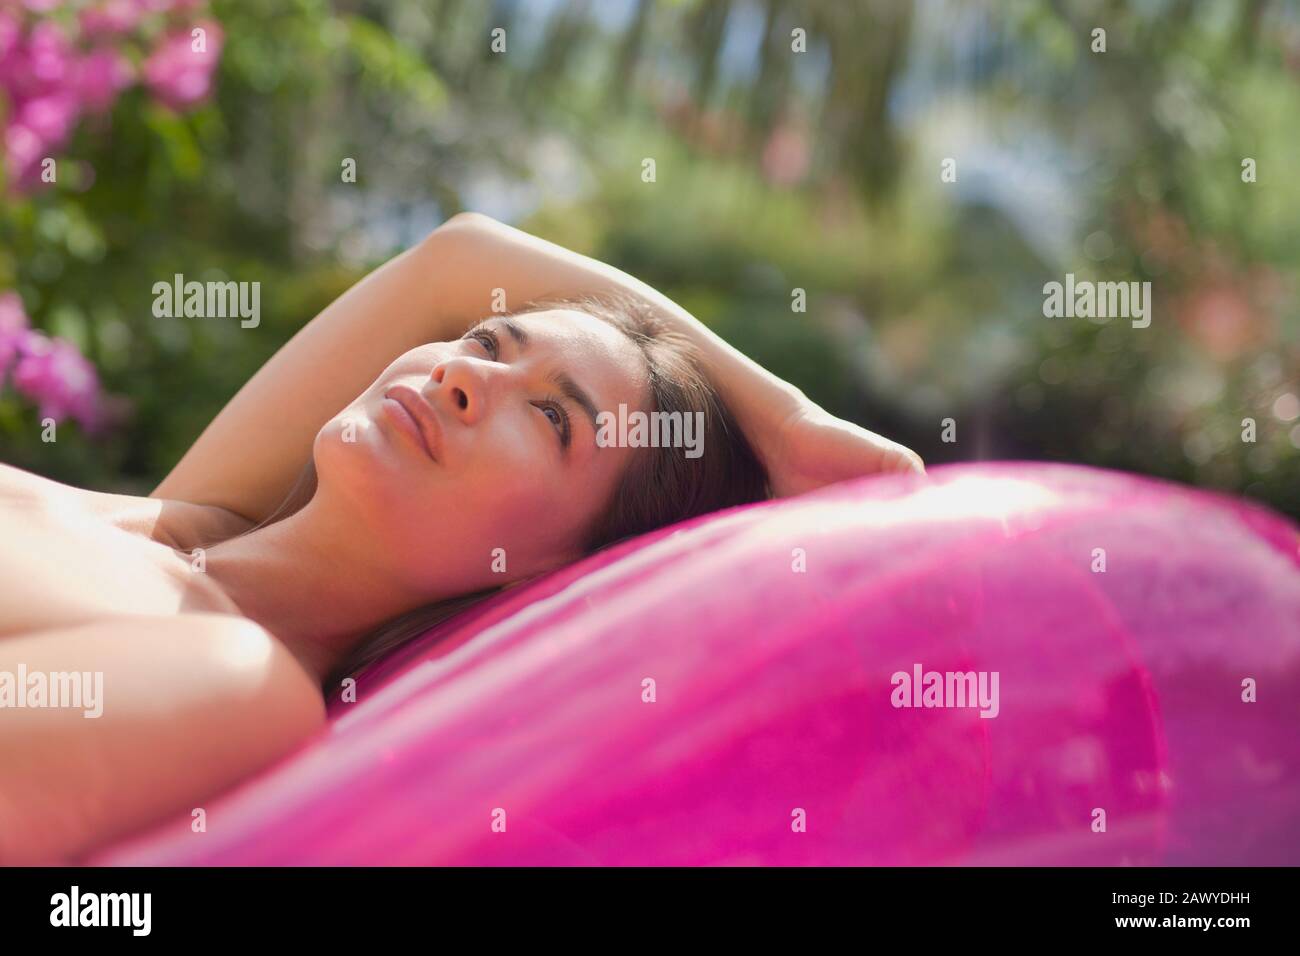 Serene woman relaxing on pink inflatable pool raft Stock Photo